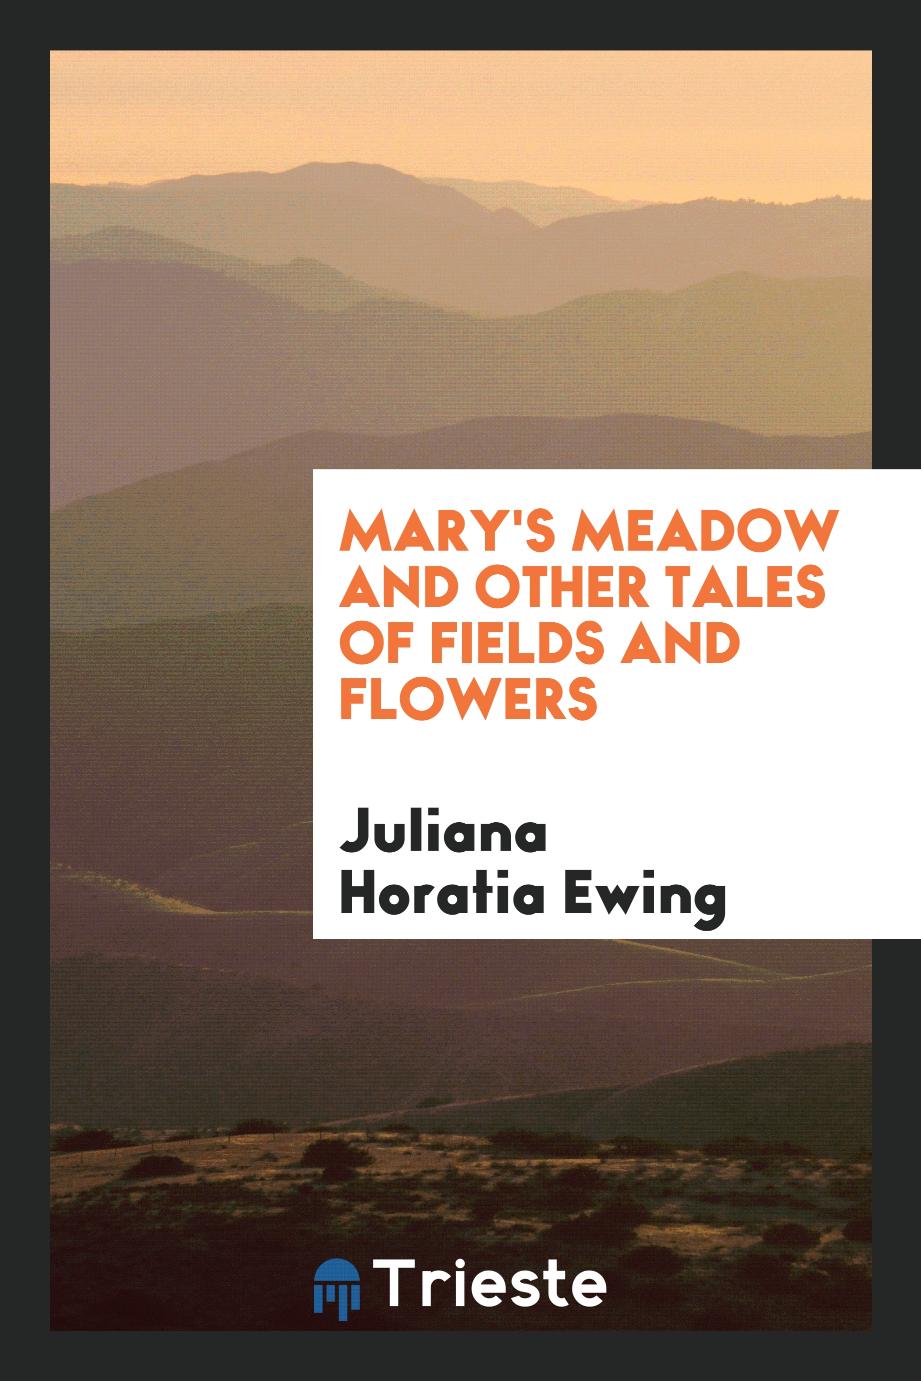 Mary's meadow and other tales of fields and flowers